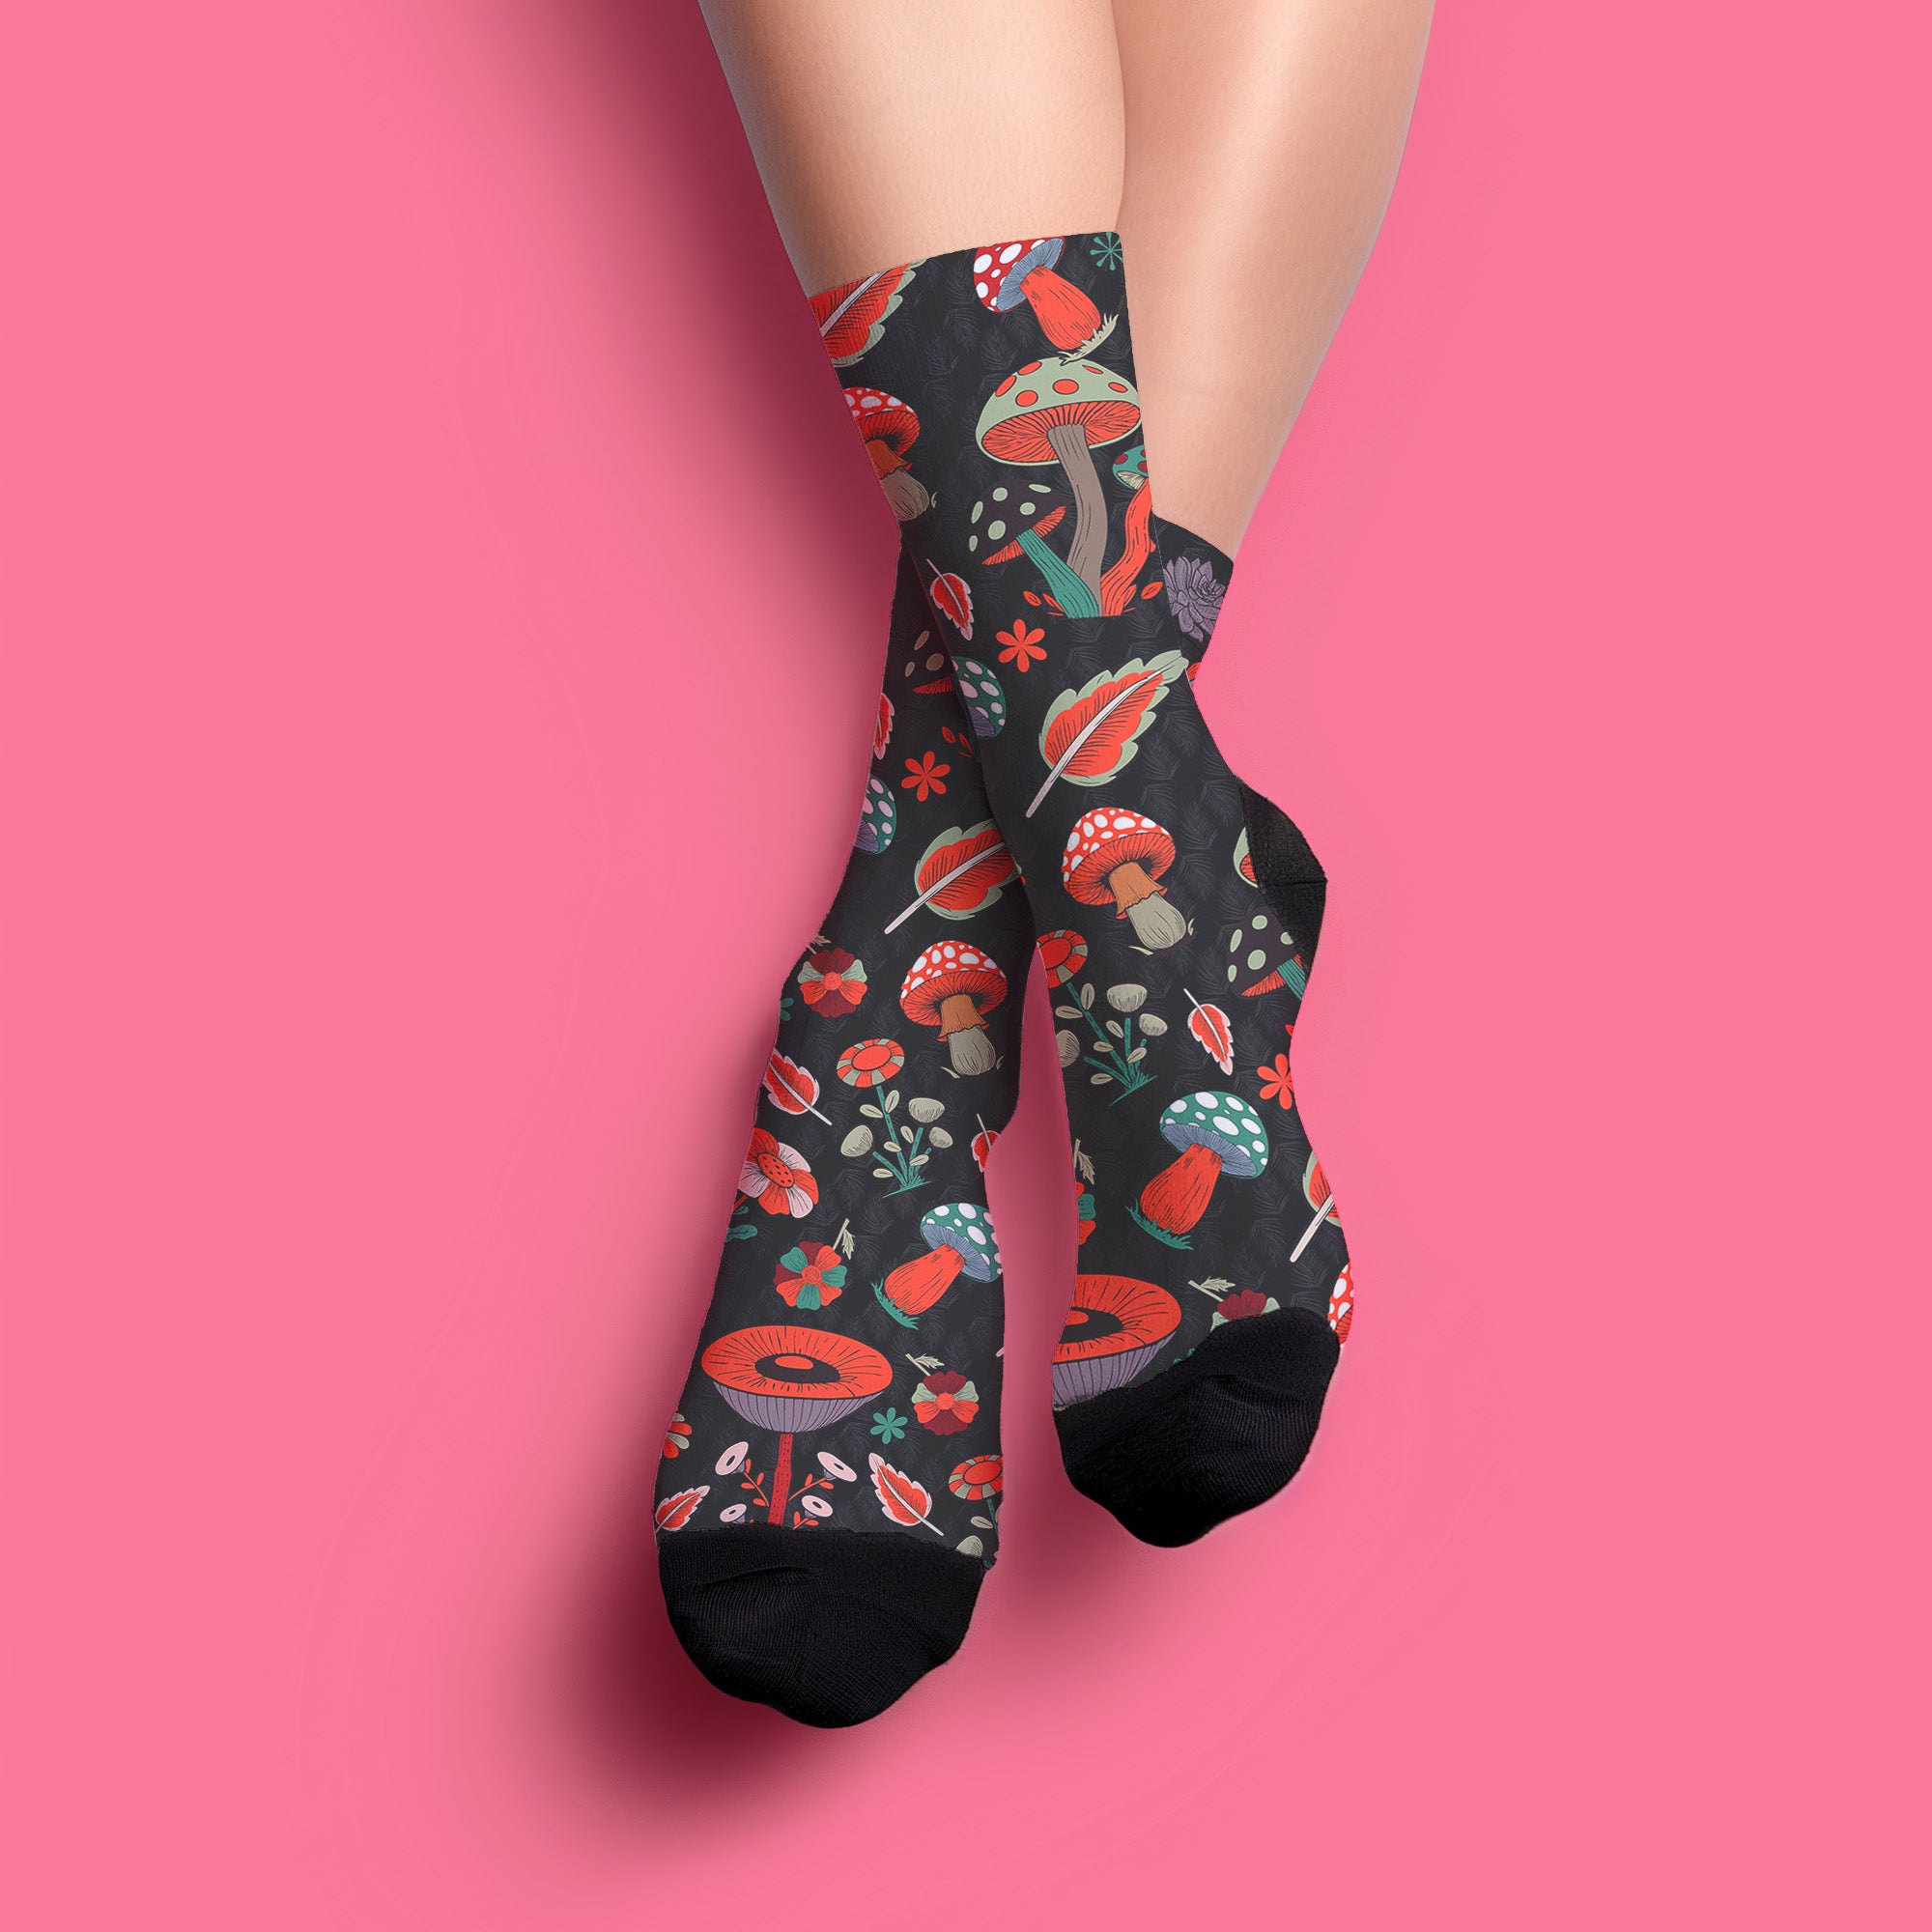 Stylish black socks with a vibrant pattern of mushrooms and nature elements, featuring black heels and toes, ideal for those who appreciate quirky and whimsical designs.